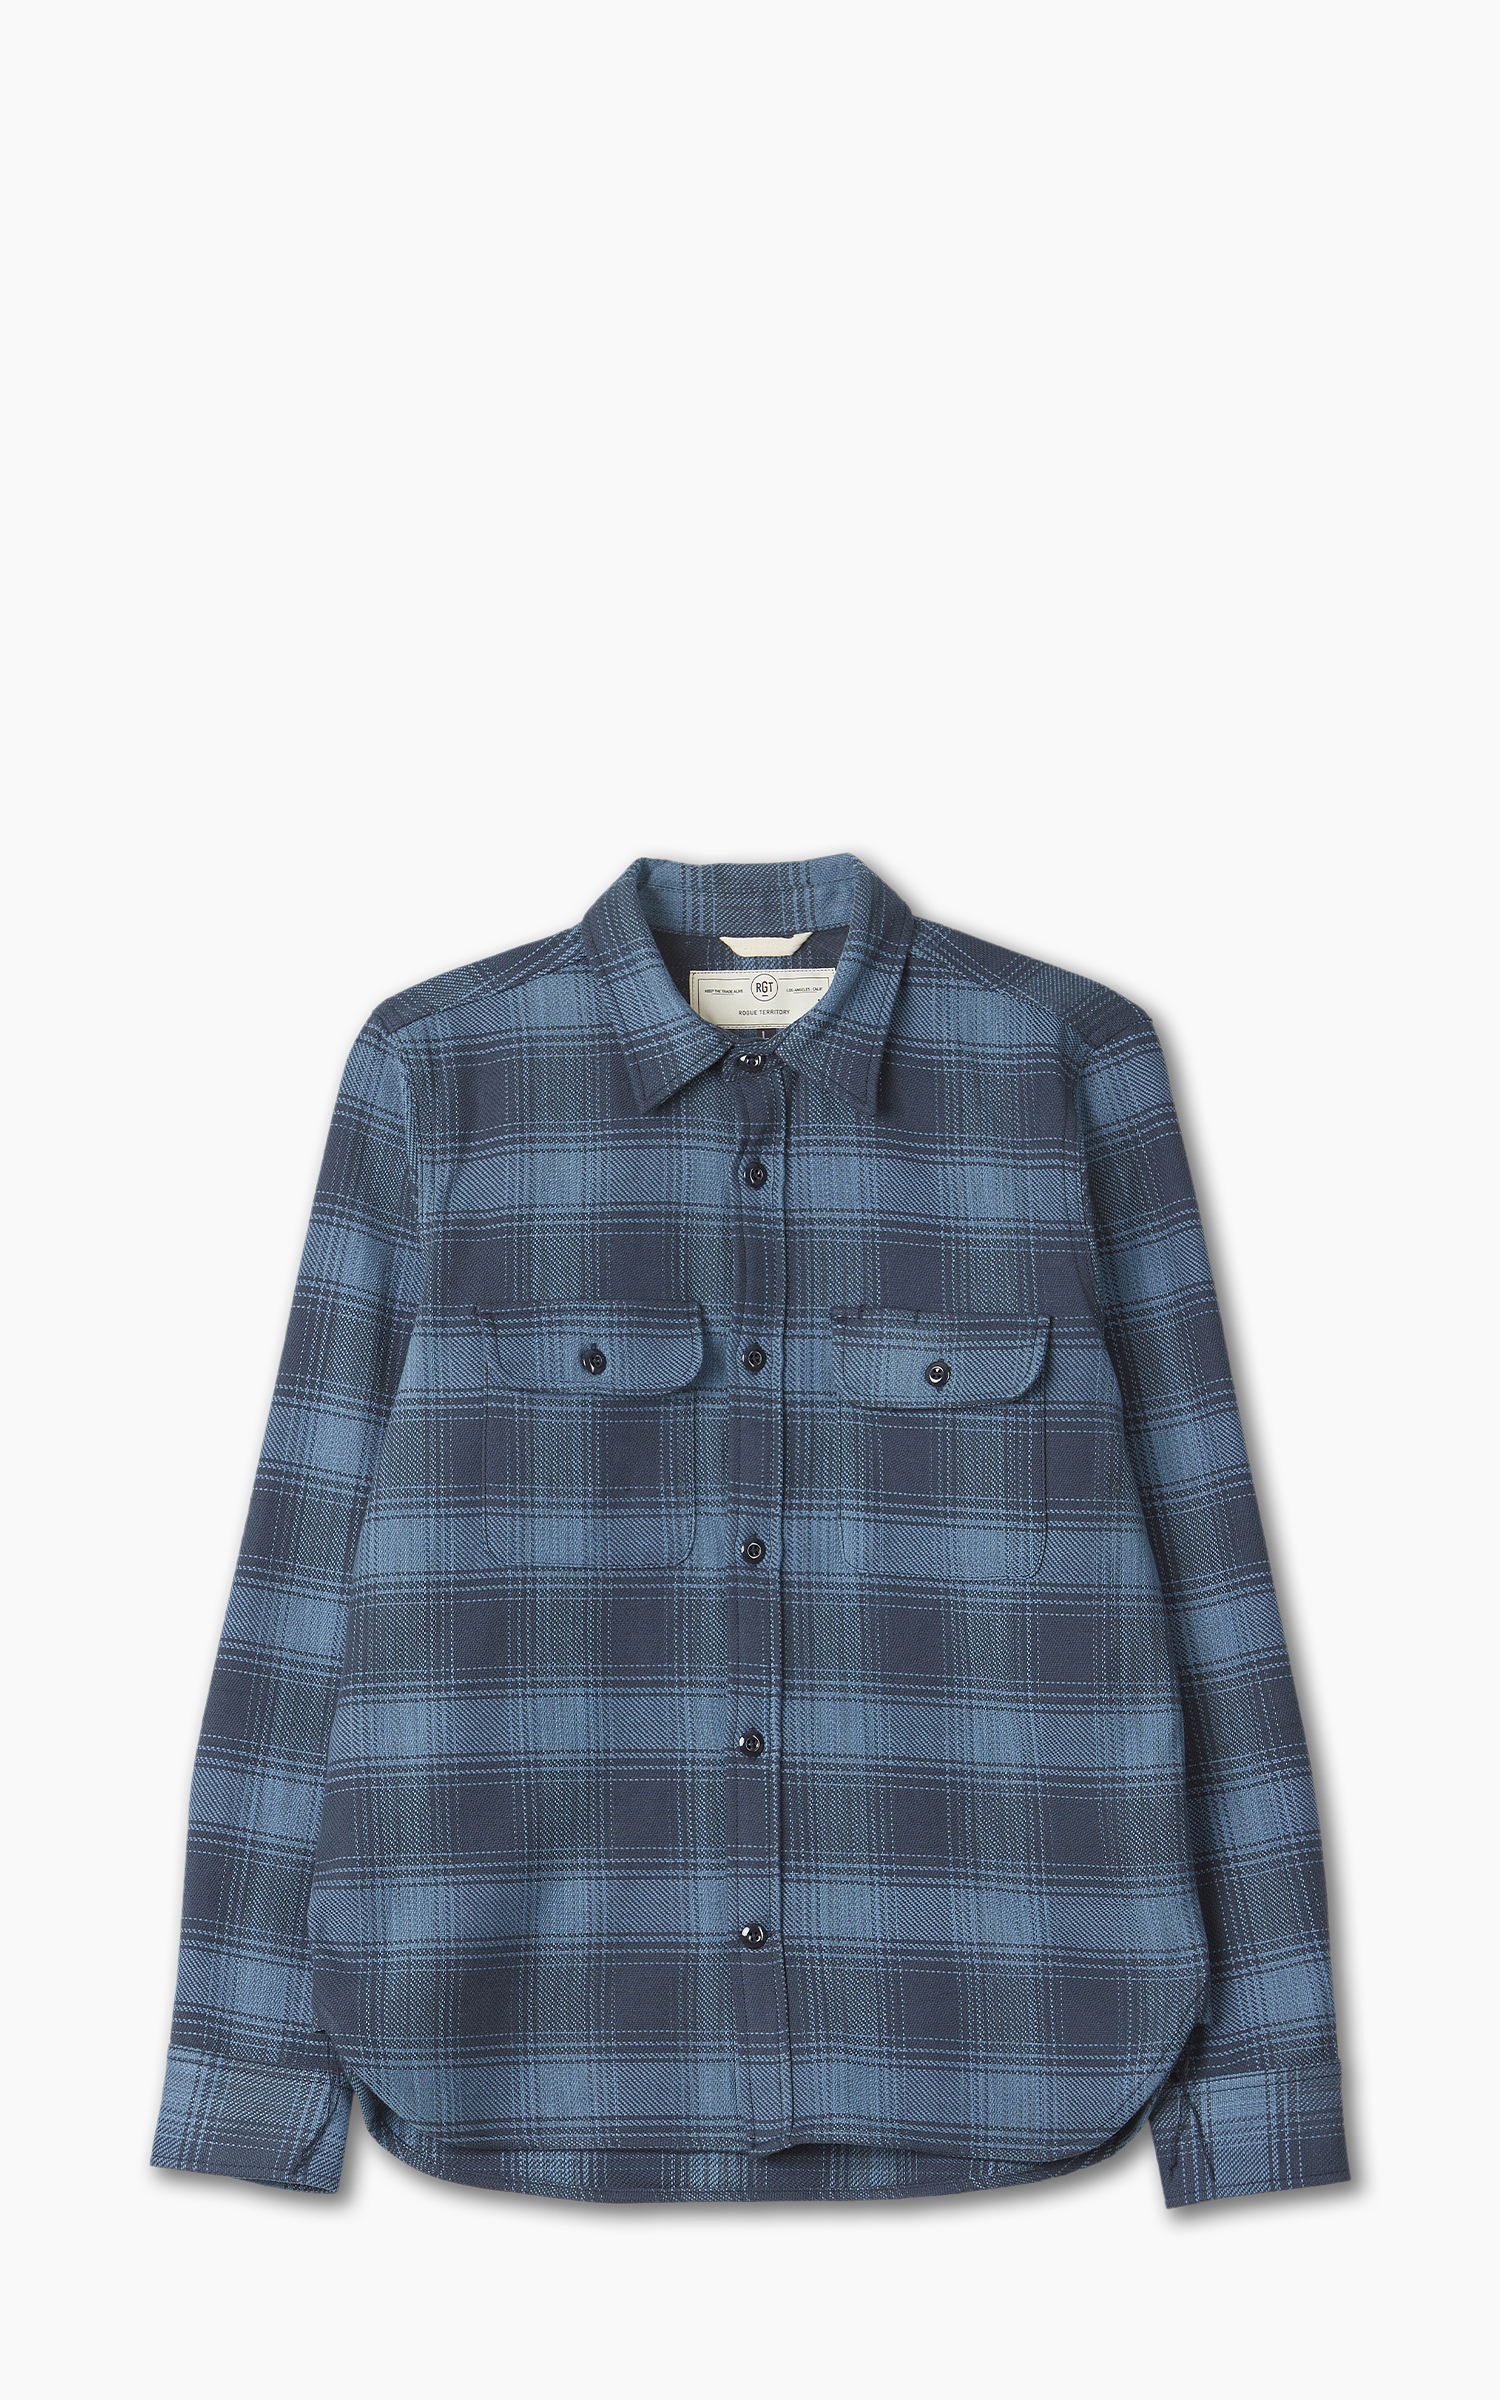 Rogue Territory Field Shirt Blueberry Plaid | Cultizm